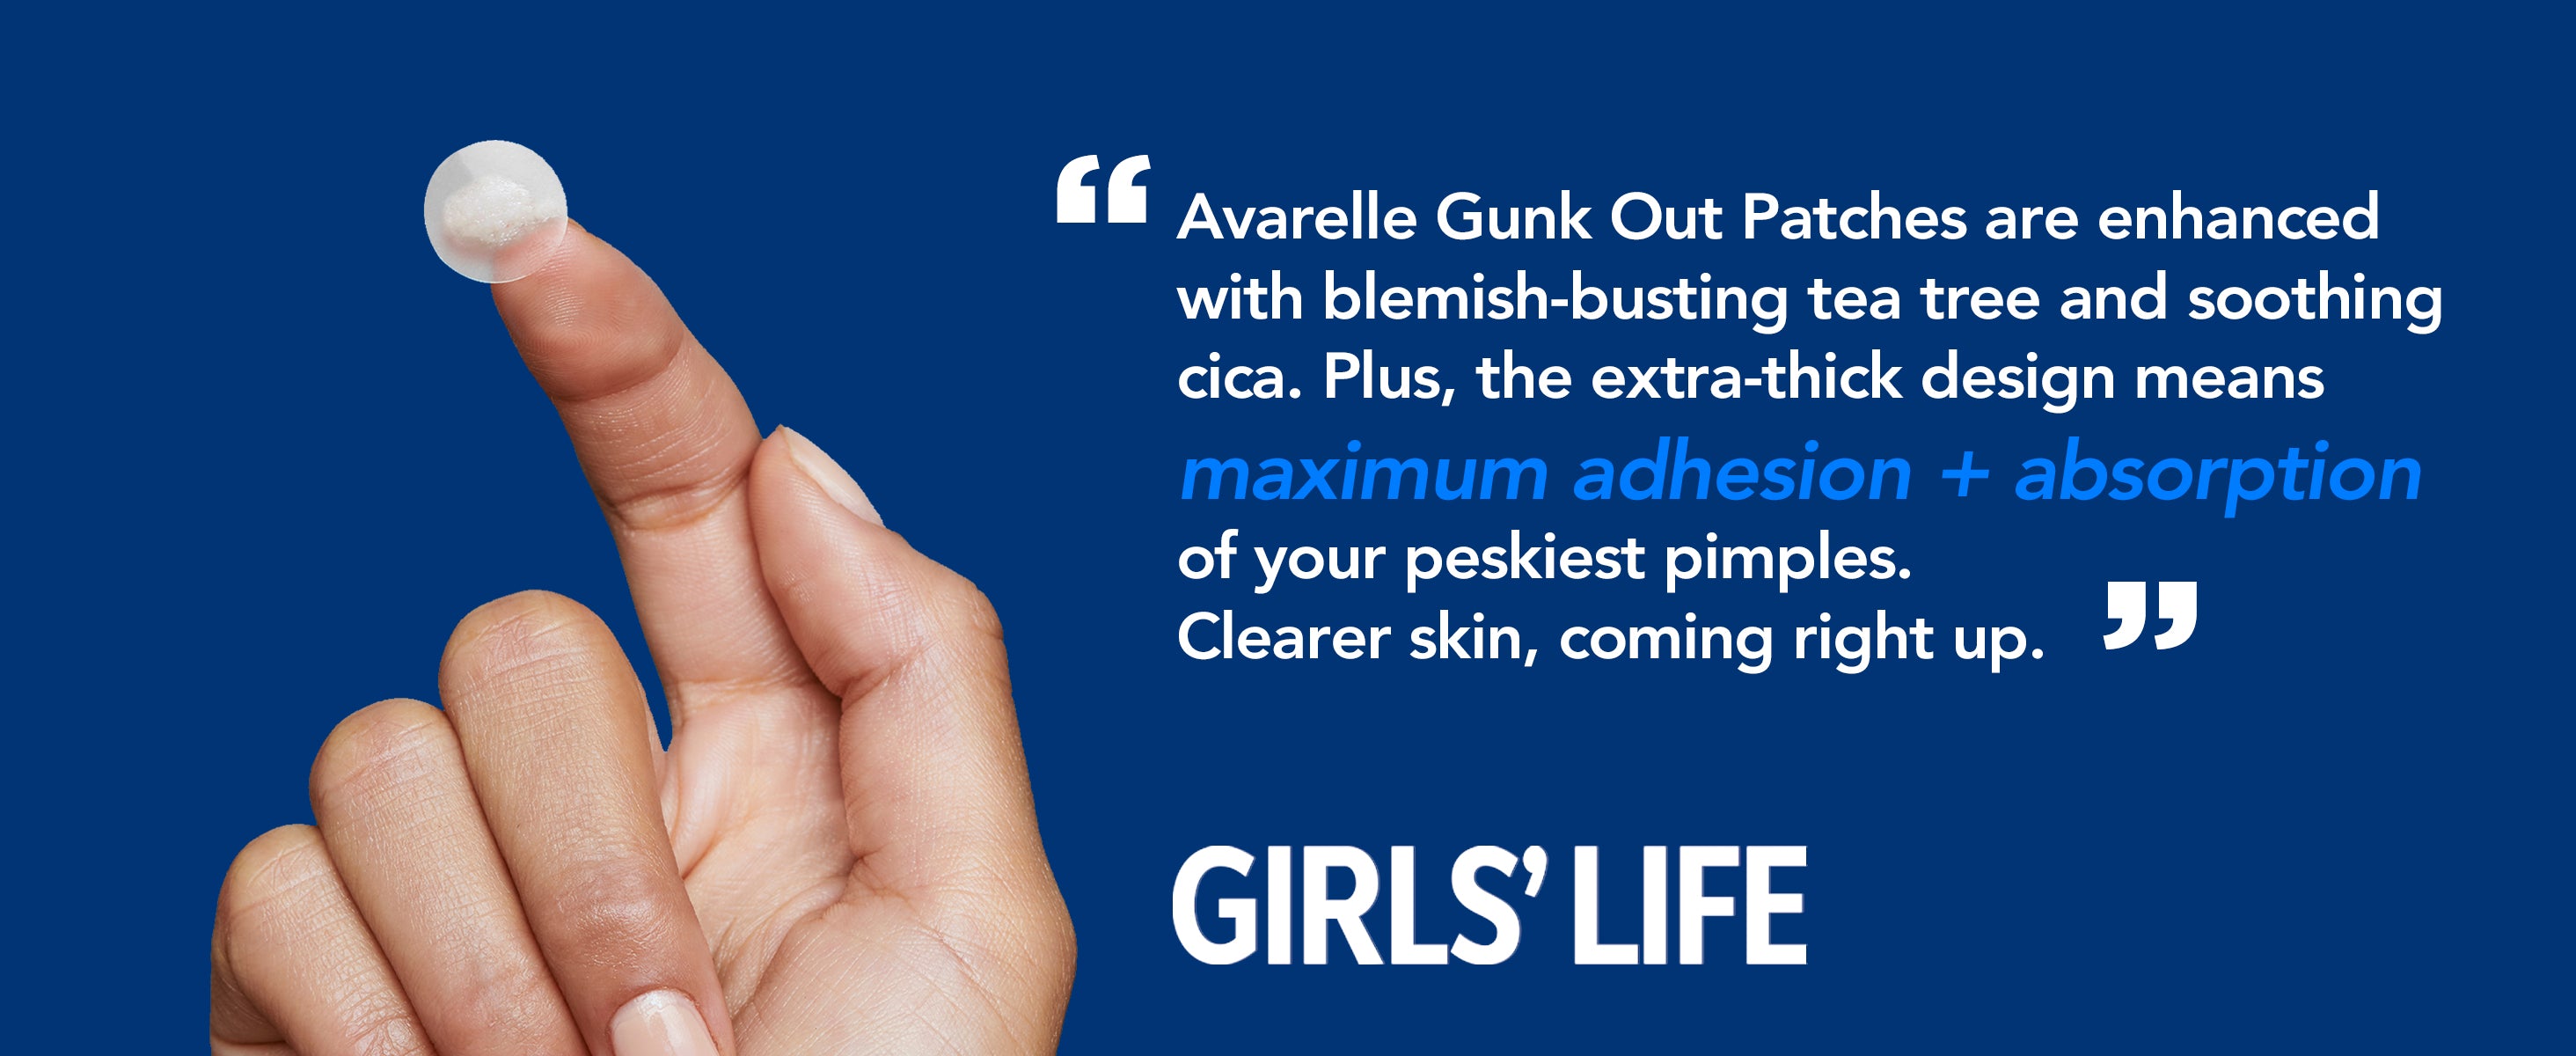 showcasing an Avarelle GUNK OUT: Spot Tech 100CT pimple patch on a finger with benefits listed for clearer skin. by Girls' Life quoting "Avarelle Gunk Out Patches are enhanced with blemish-busting tea tree and soothing cica. Plus, the extra-thick design means maximum adhesion + absorption of your peskiest pimples. Clearer skin, coming right up."